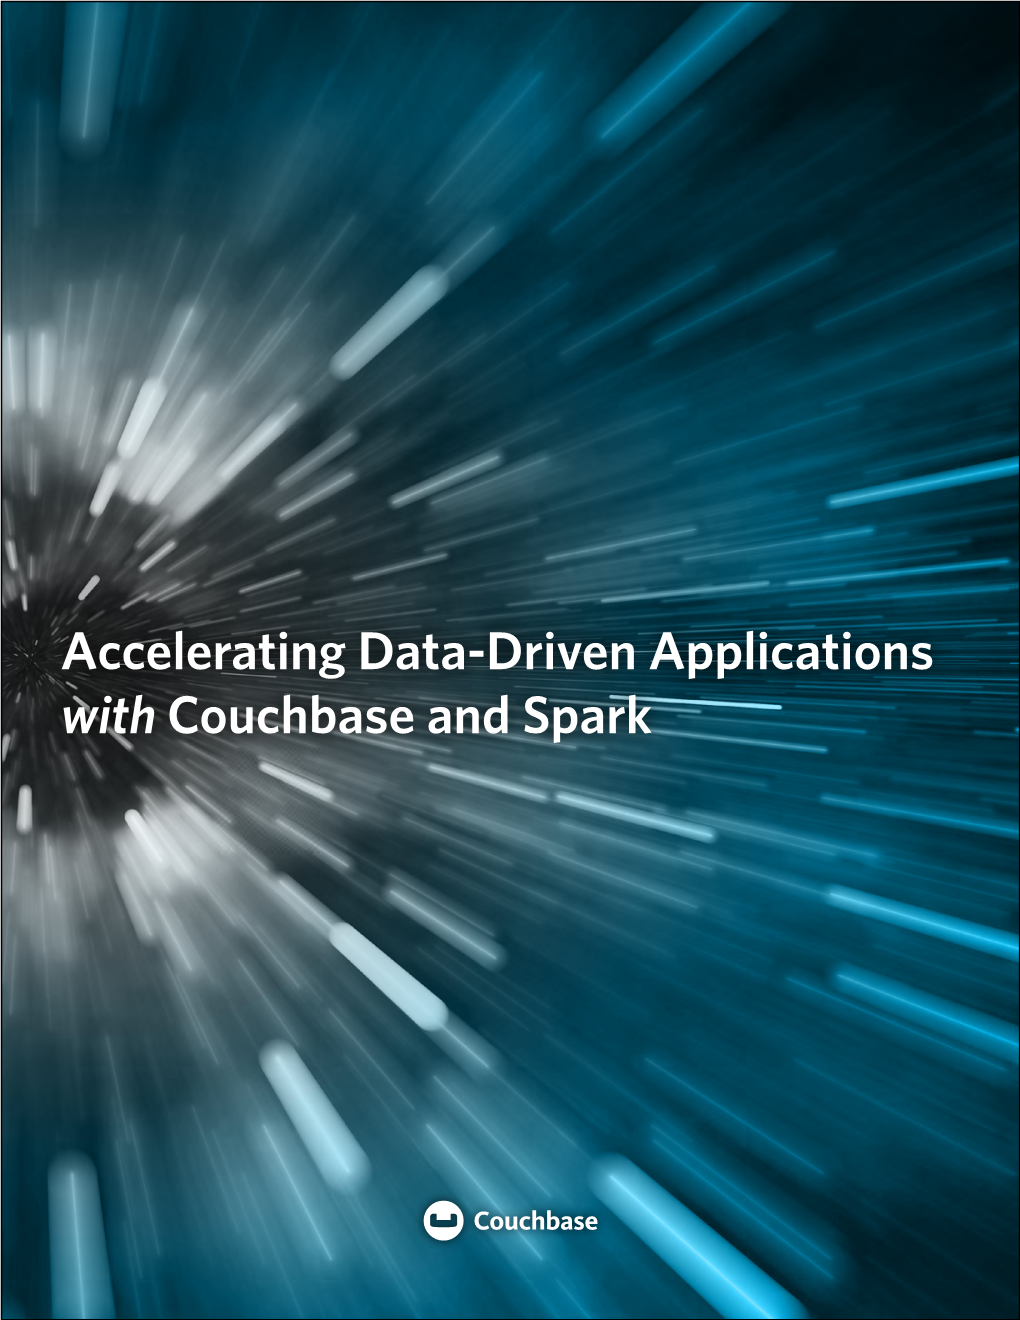 Accelerating Data-Driven Applications with Couchbase and Spark Accelerating Data-Driven Applications with Couchbase and Spark